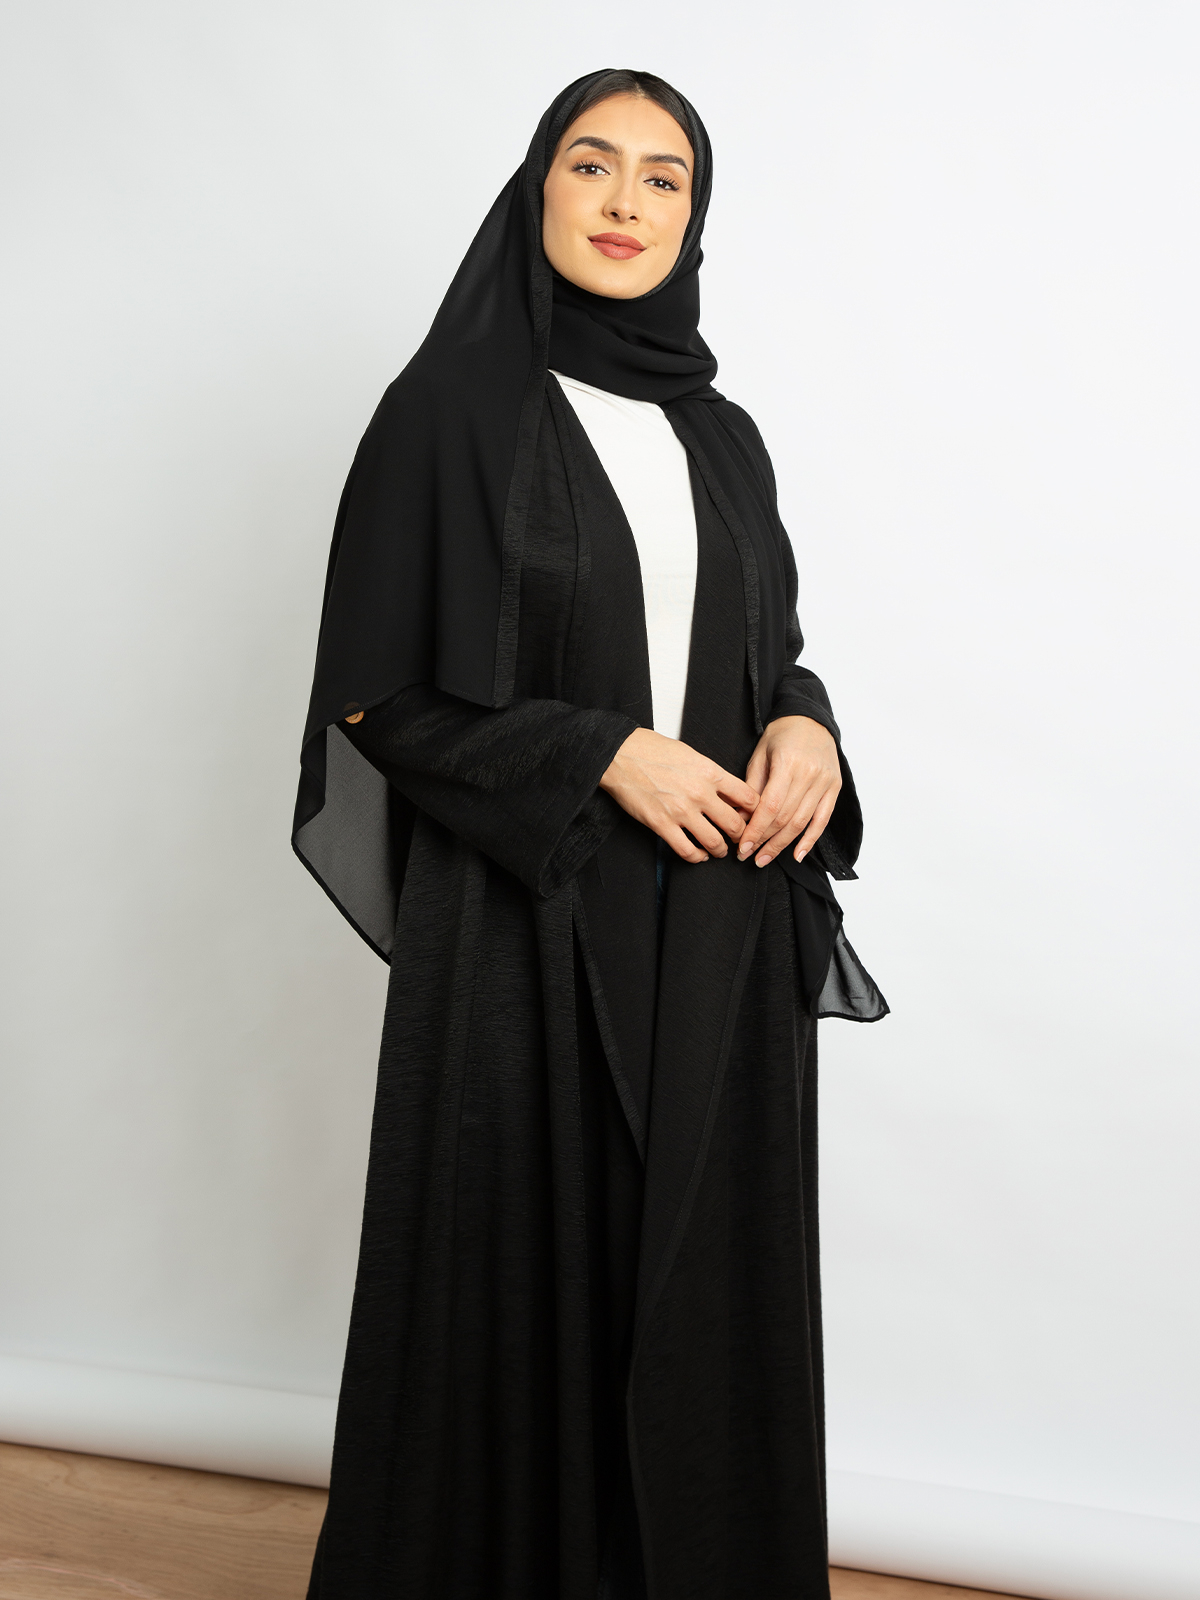 Open long wide cut comfy abaya with adjustable sleeves black color in linen-feel fabric for work and events by kaafmeem